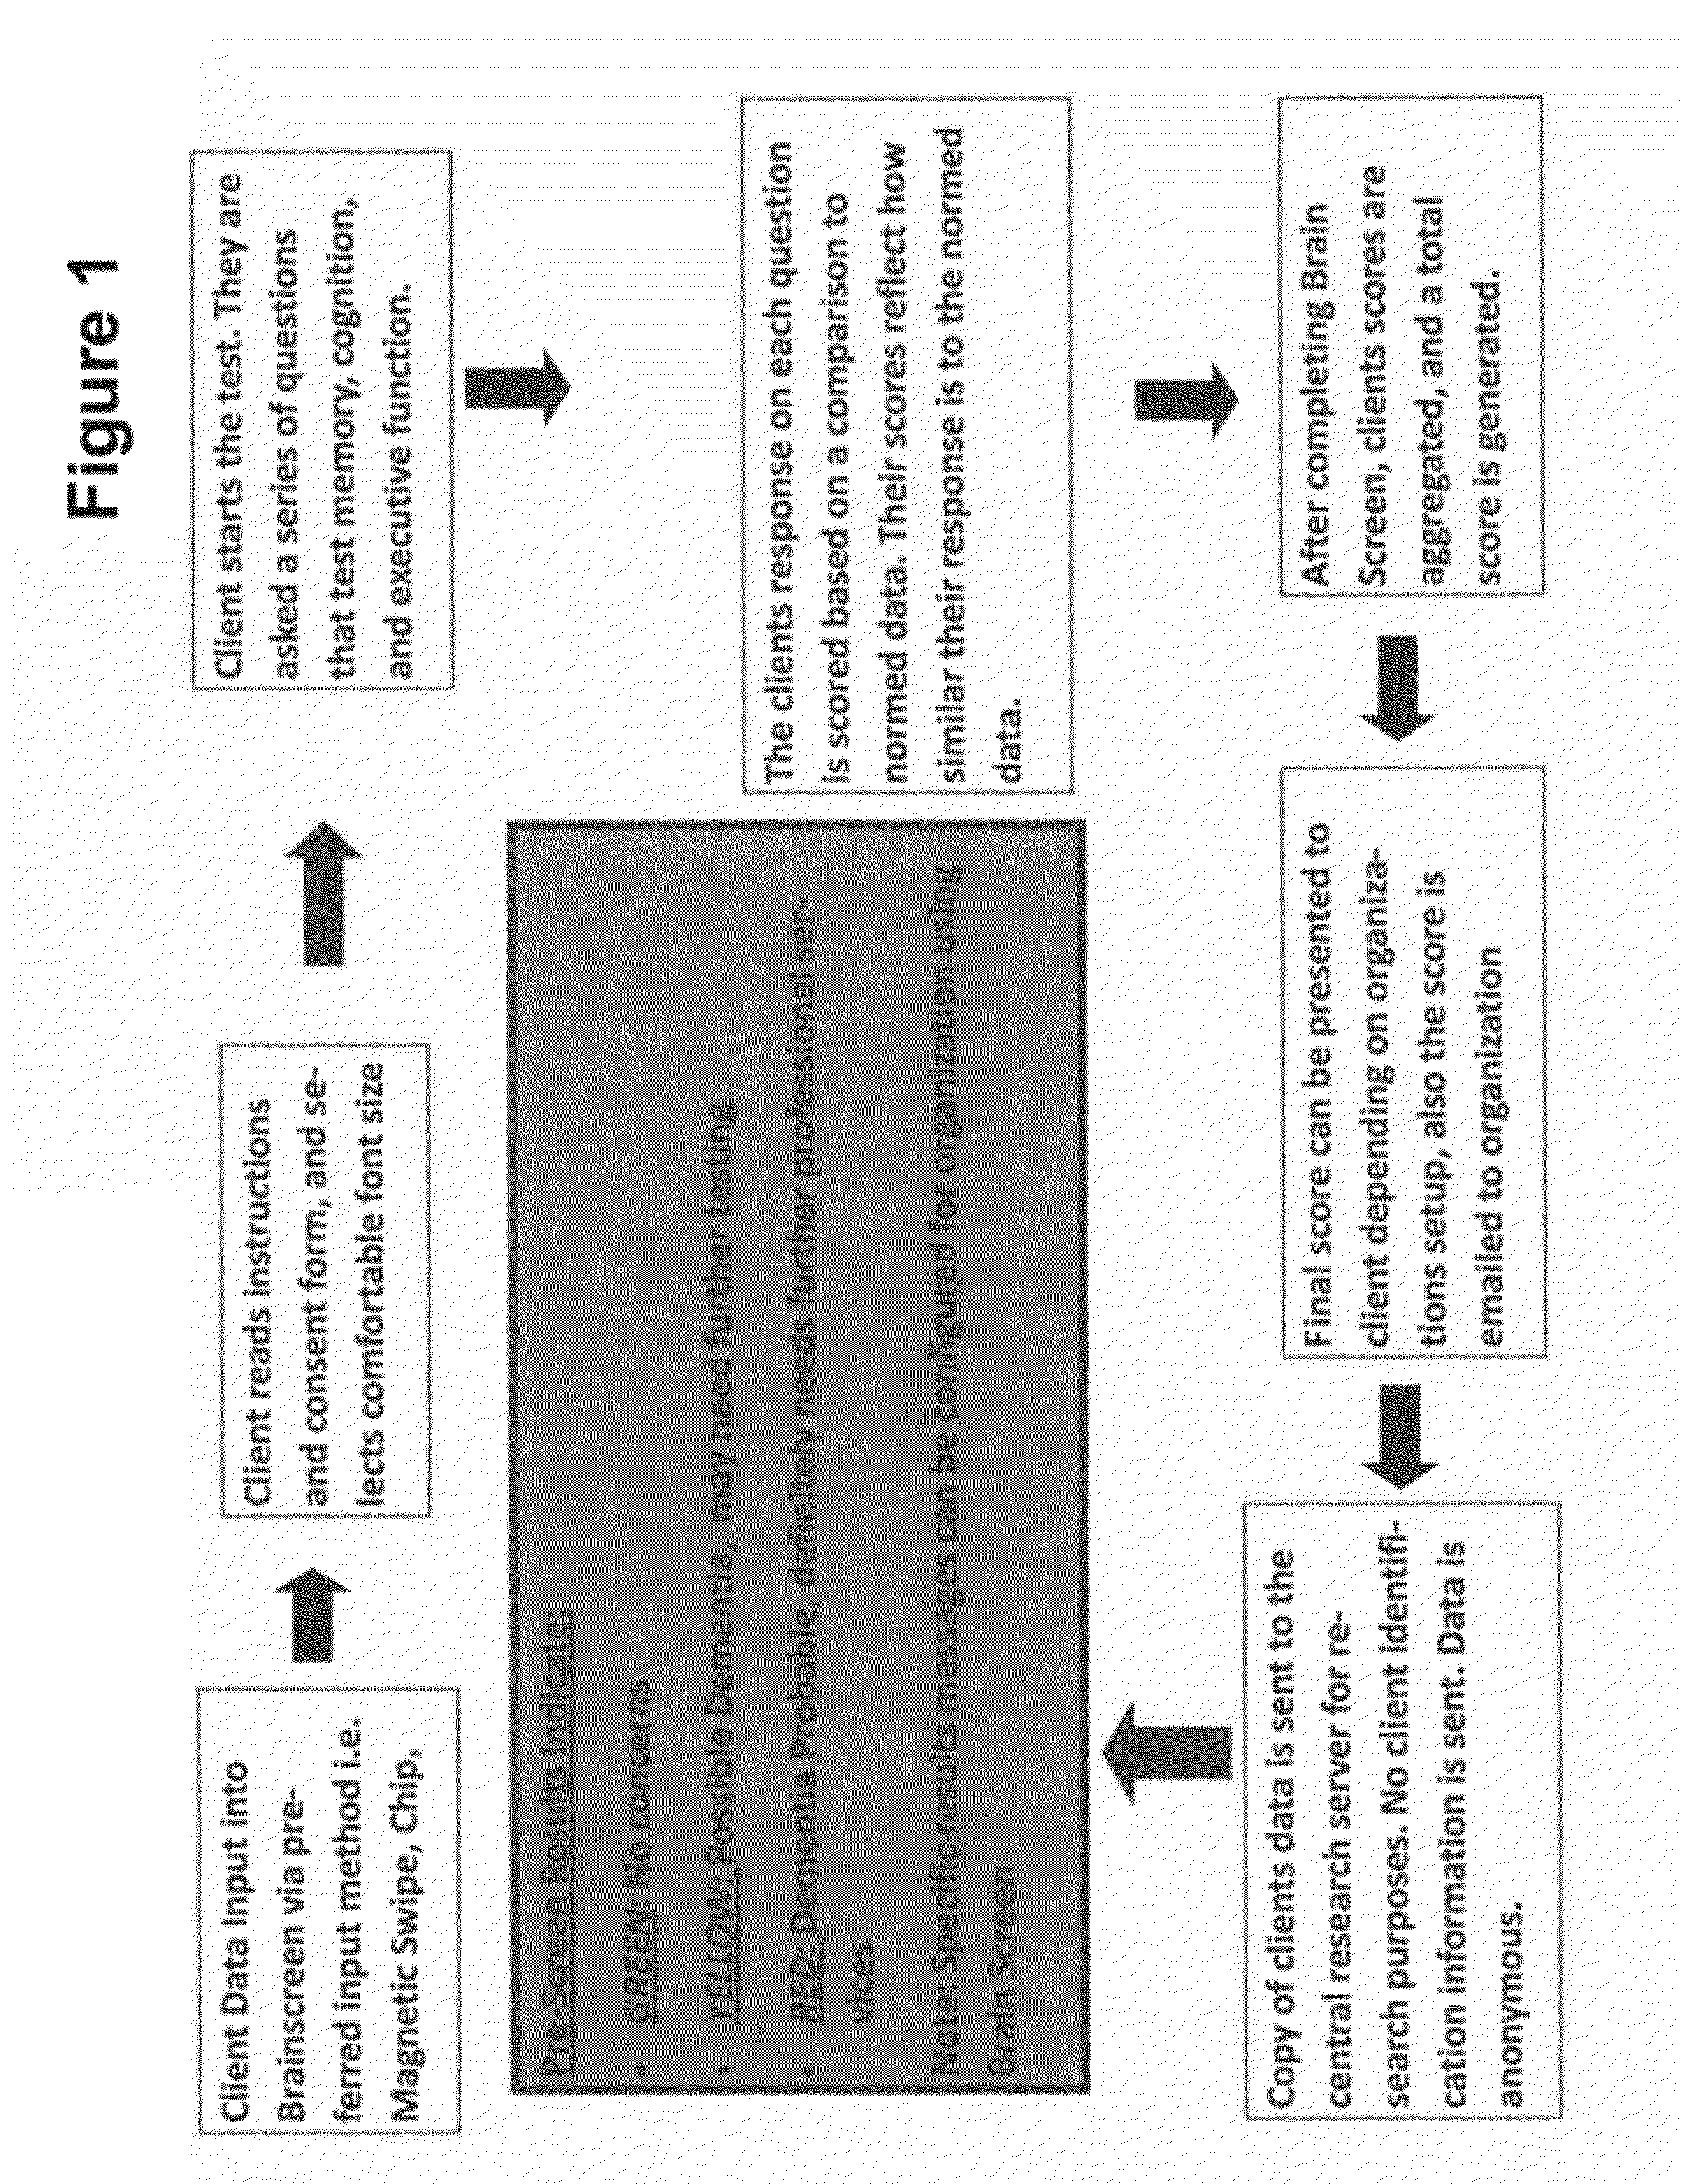 Automated cognitive testing methods and applications therefor